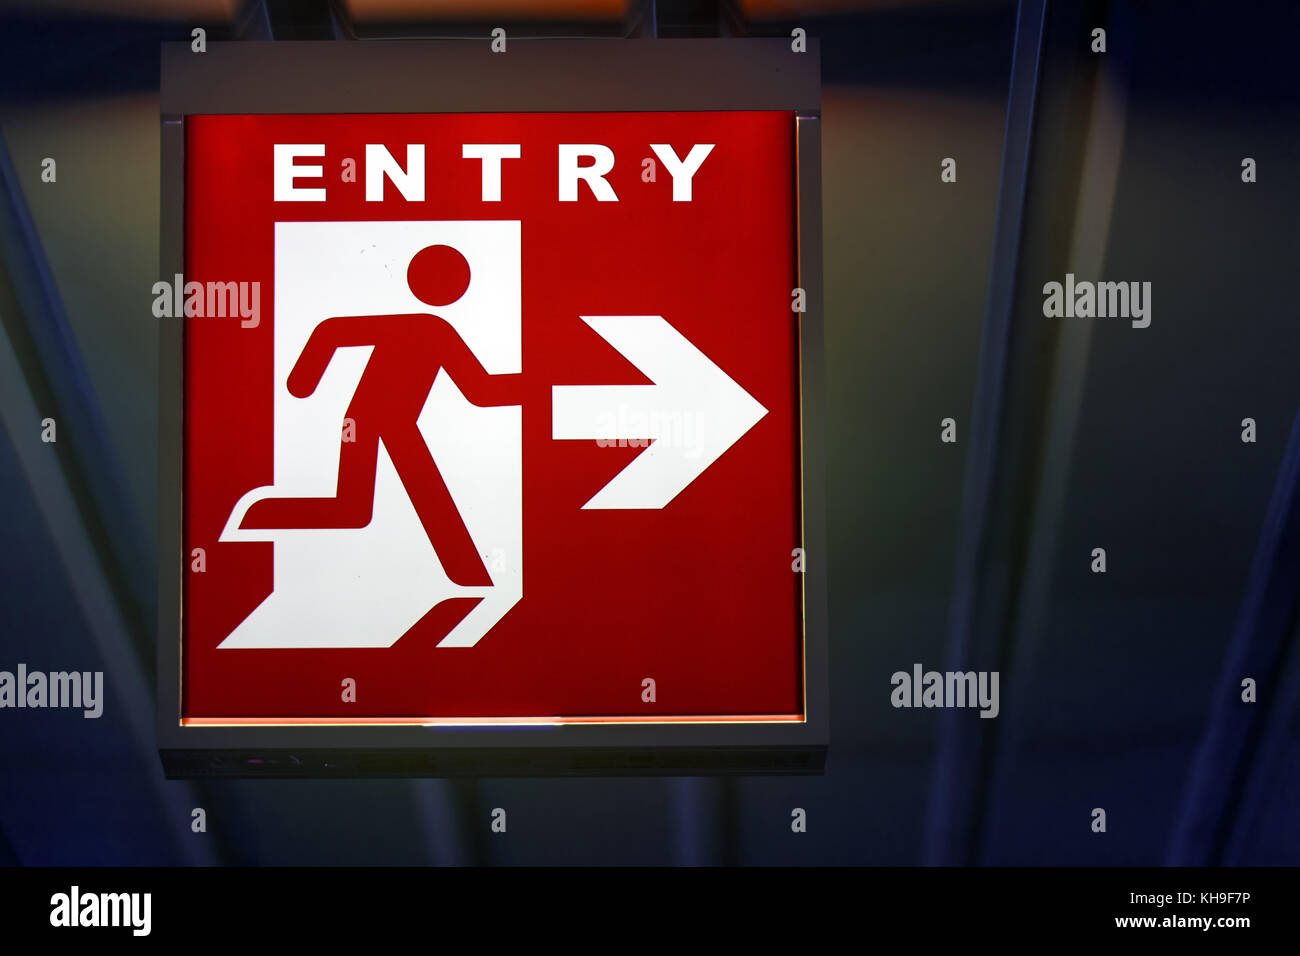 The emergency red entry sign shows the direction of entrance. The emergency entry board hangs on the ceiling of the building. Stock Photo